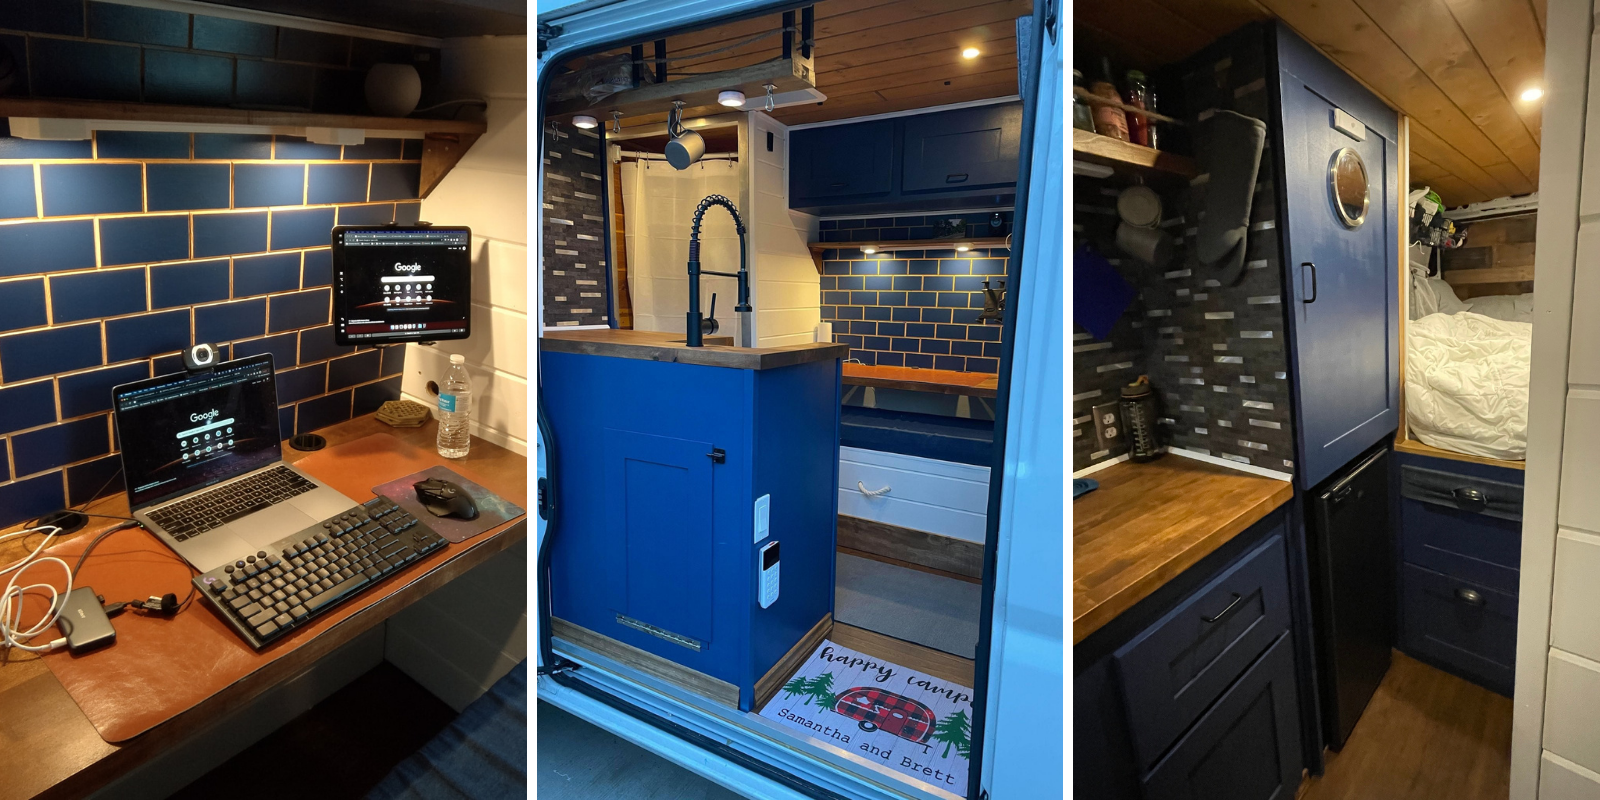 Camper Van Dreams - the finished product